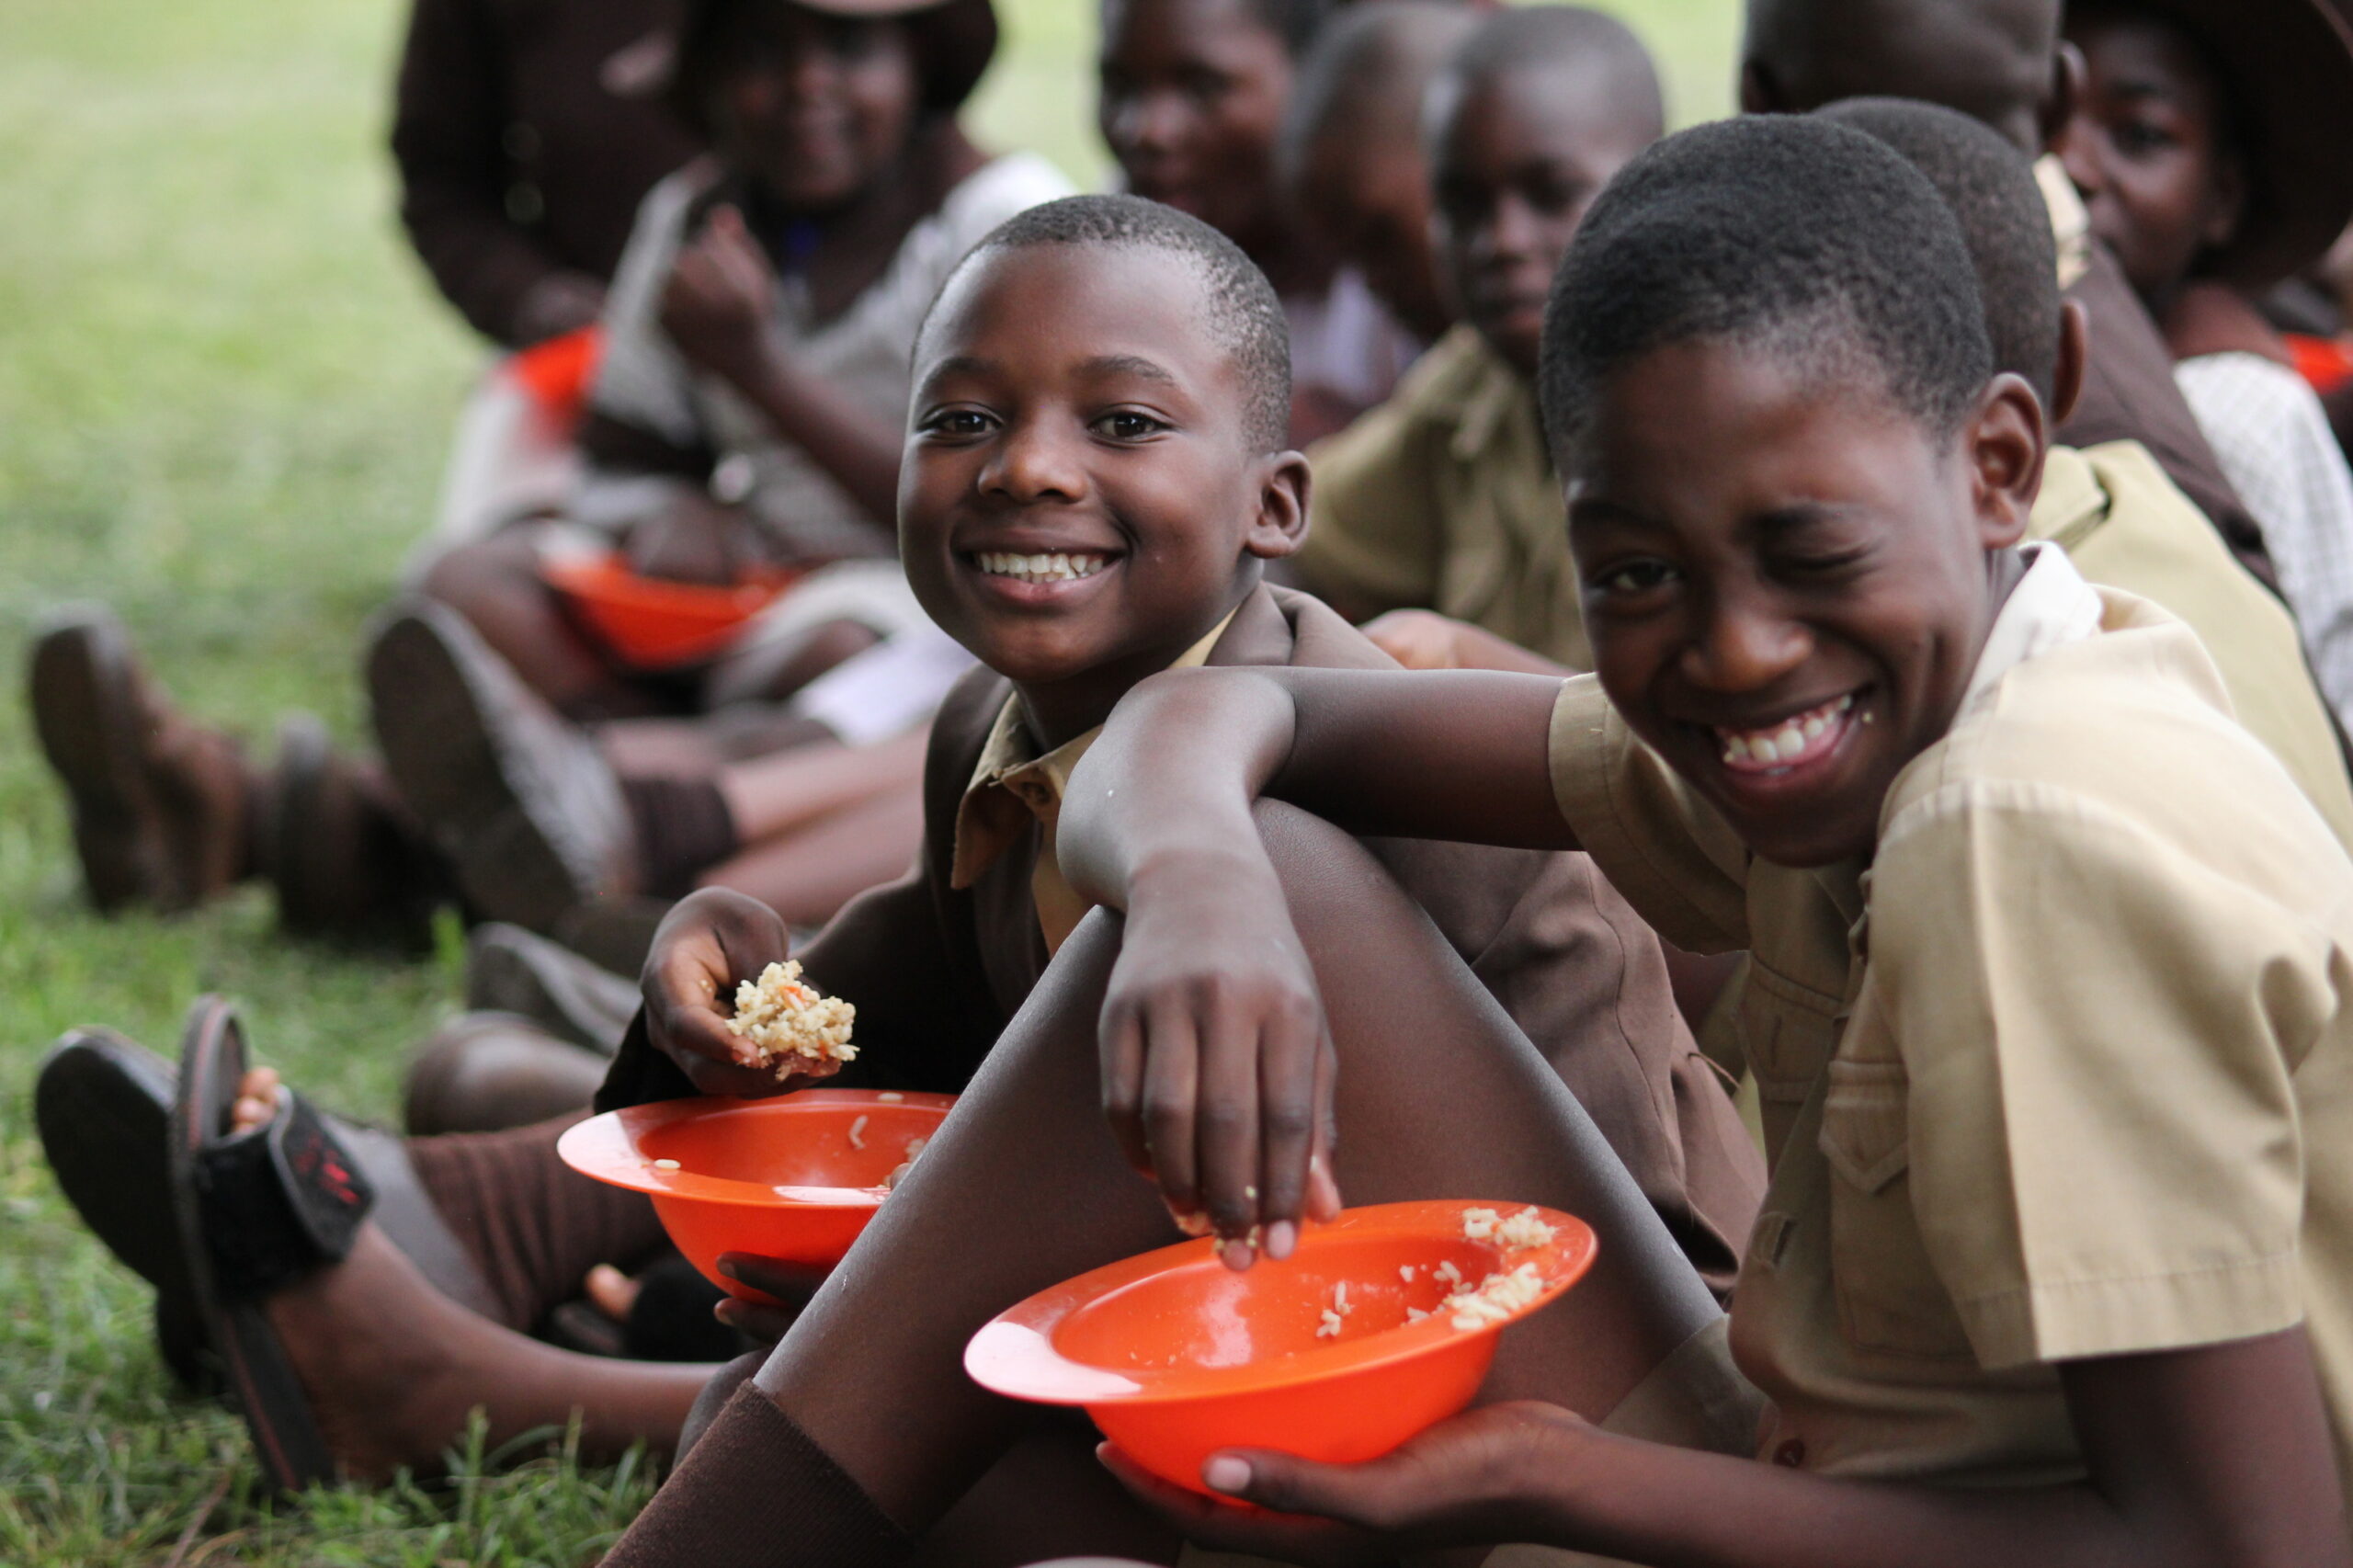 Some Zimbabwean boys in school uniform are sitting on green grass eating their lunch out of orange bowls. The boy in the foreground winks to the camera; the child next to him smiles broadly at the camera.